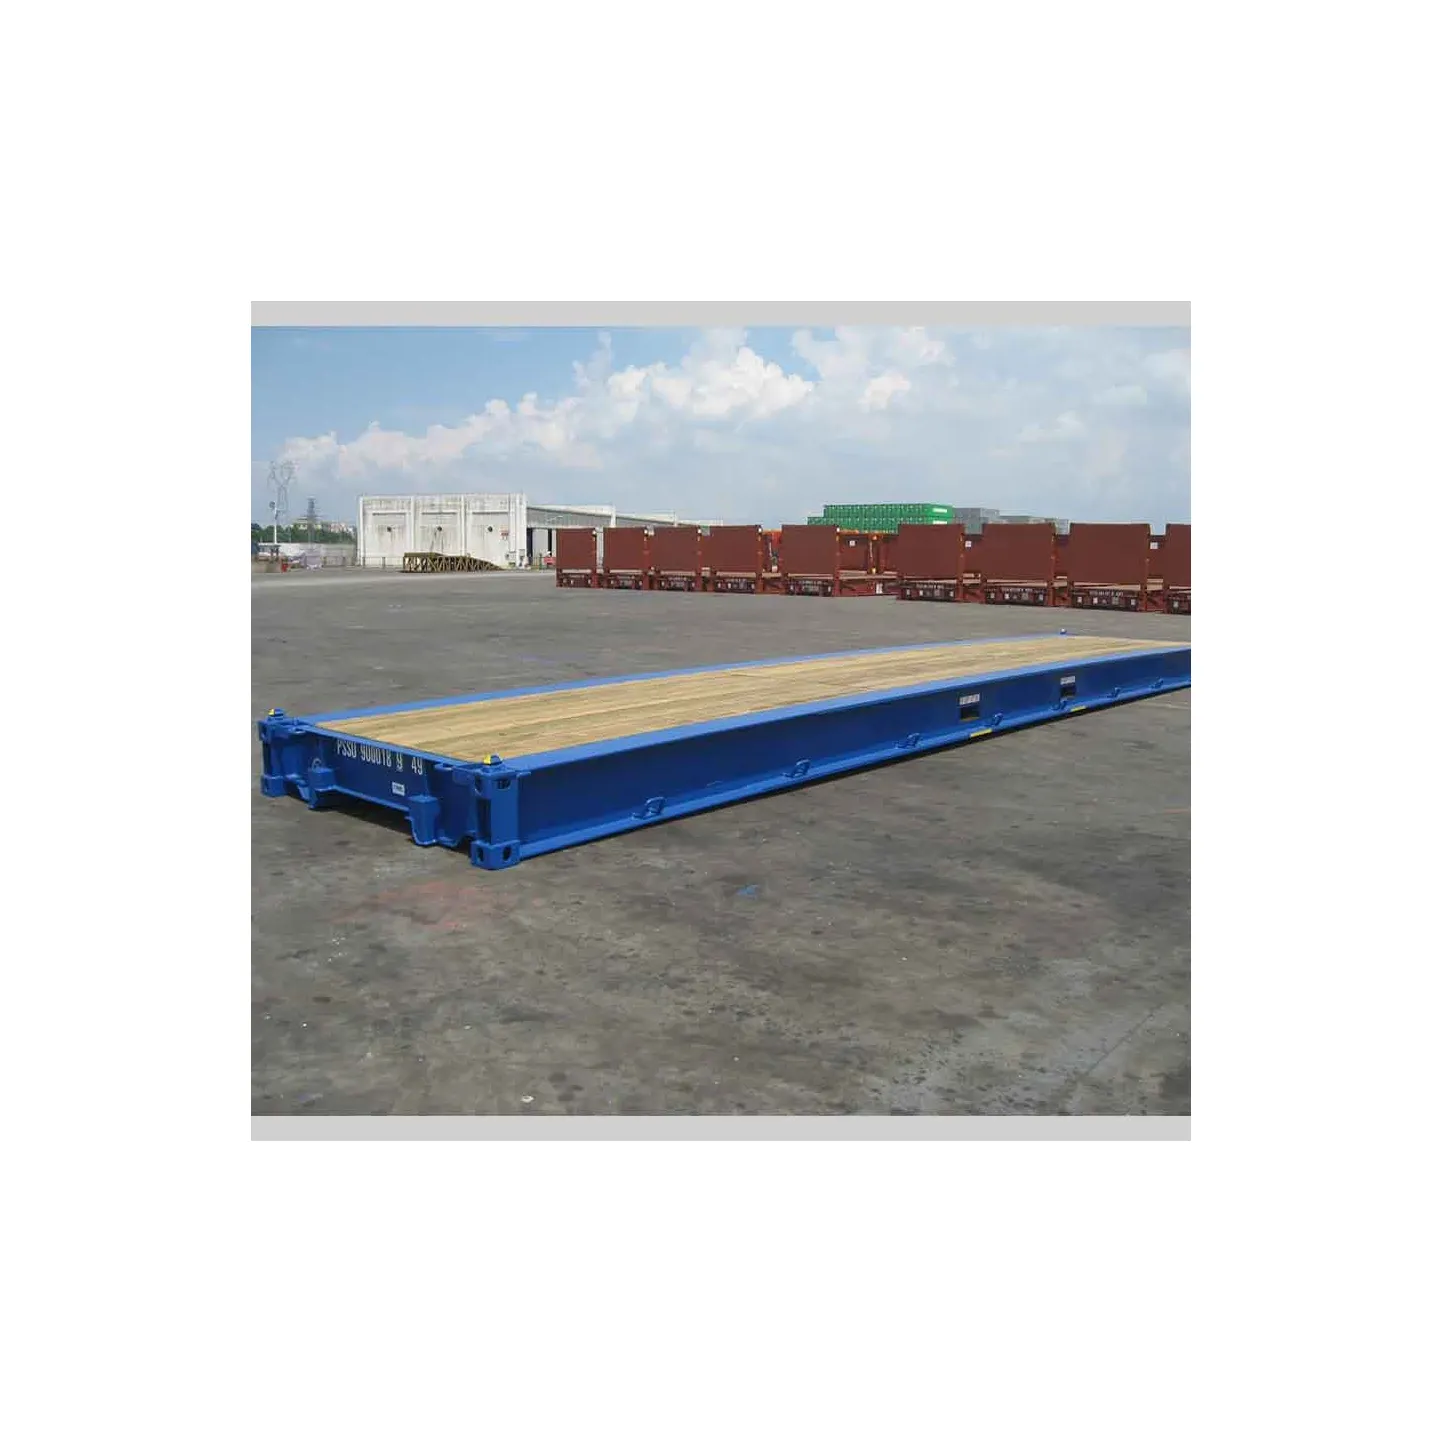 New 20FT Plat Form Shipping Container Transportation Equipment 20FT Platform Container